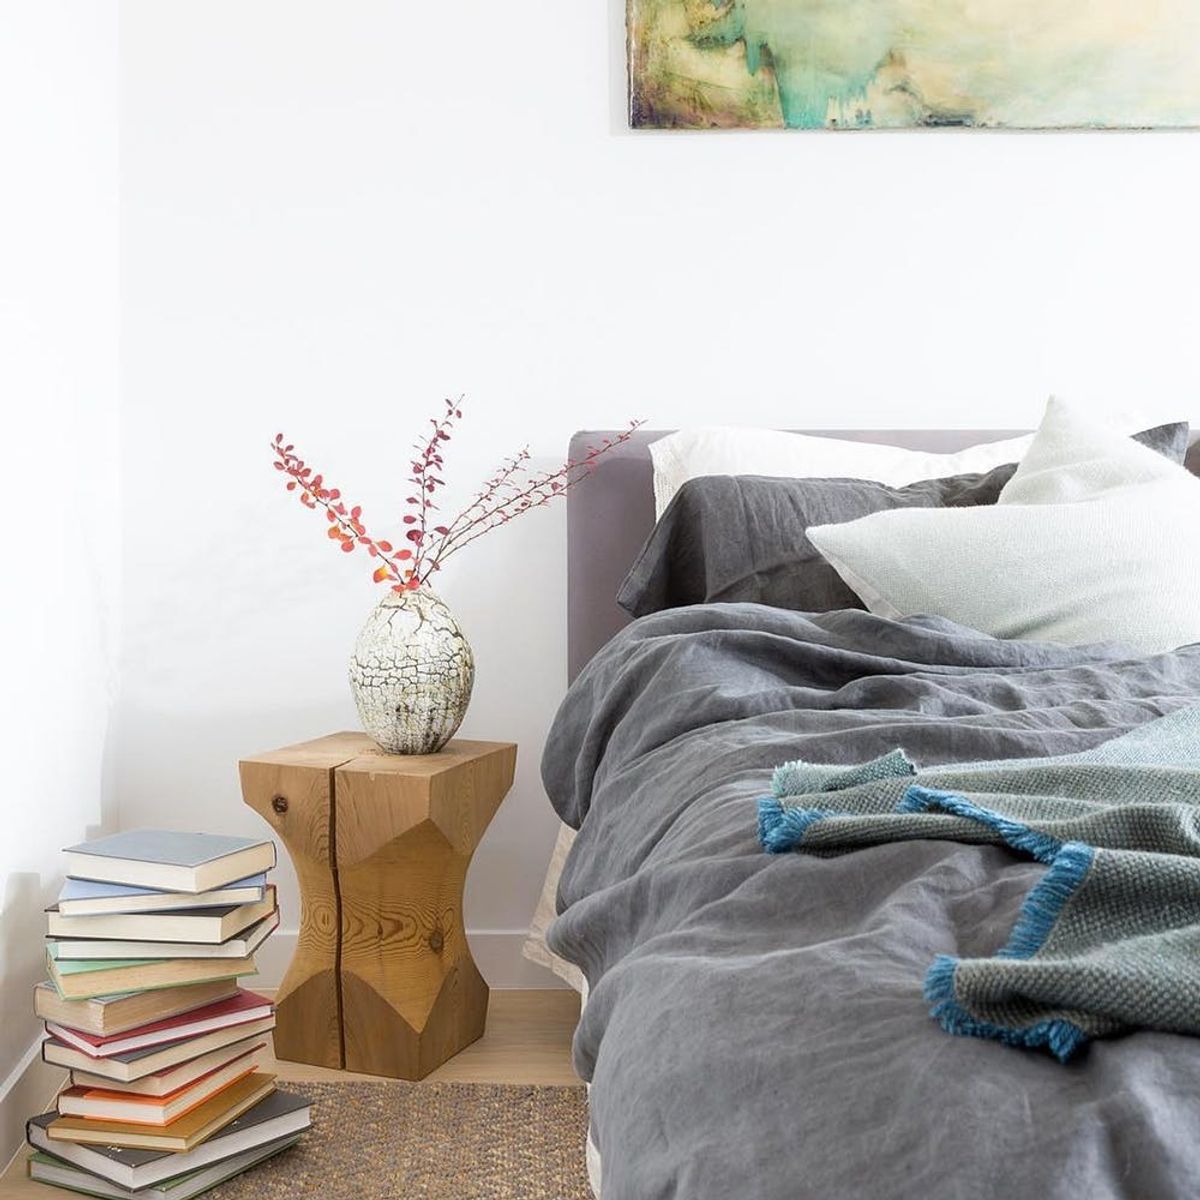 This Japanese Decor Trend Is the New Hygge